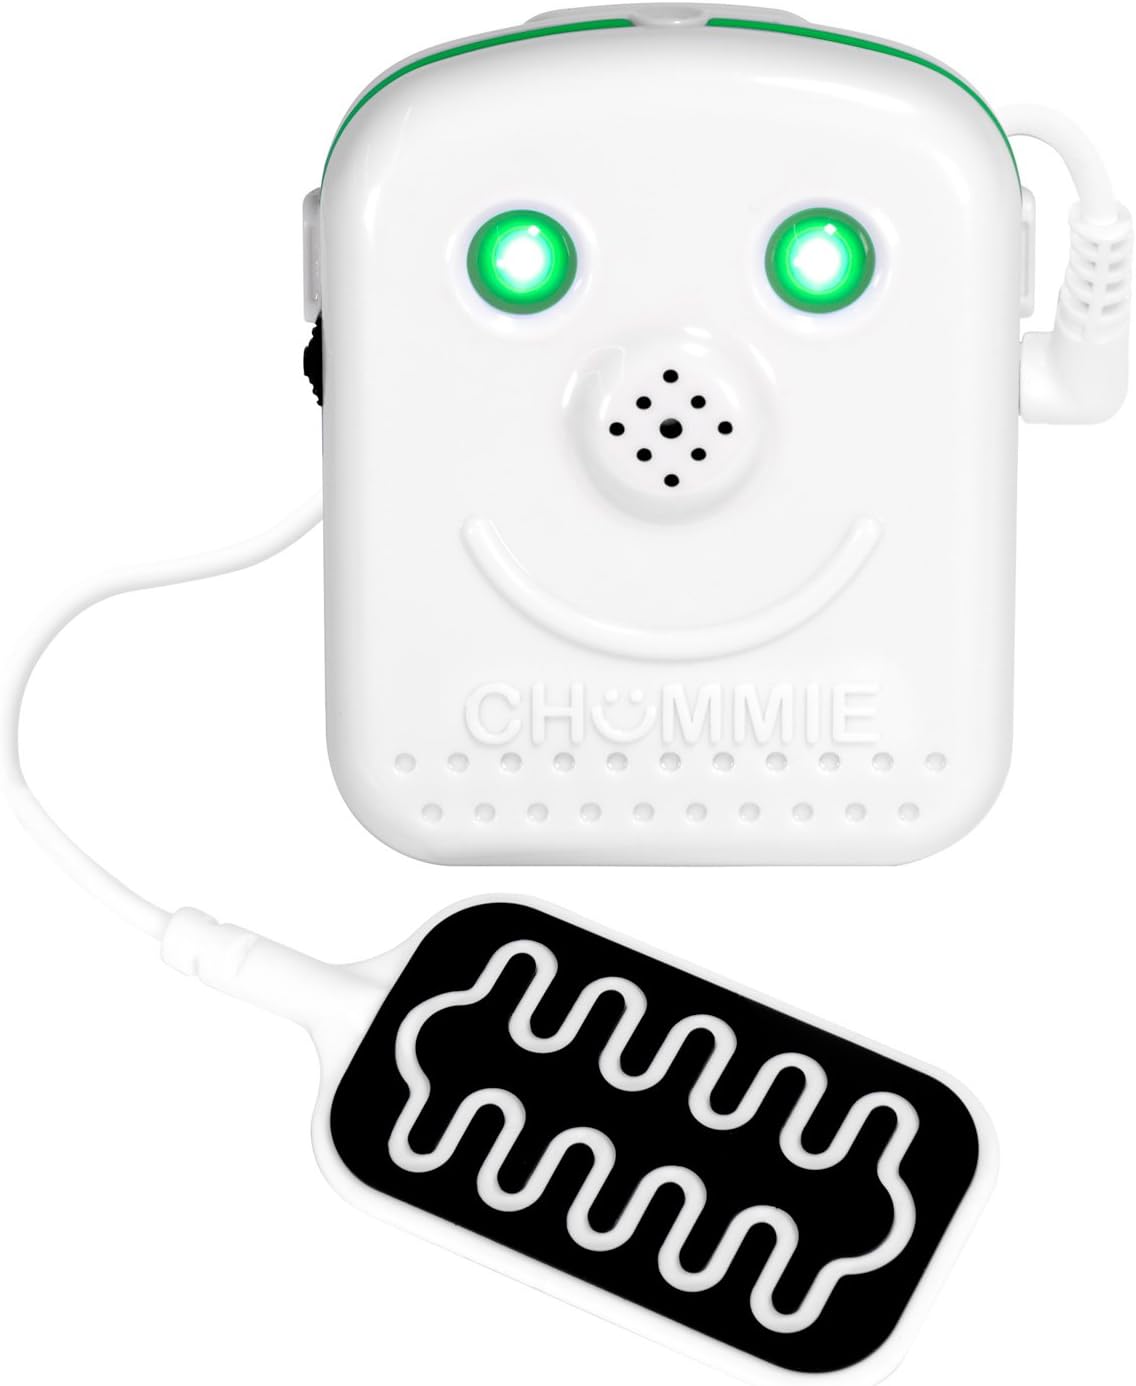  Chummie Premium Bedwetting Alarm for toddlers